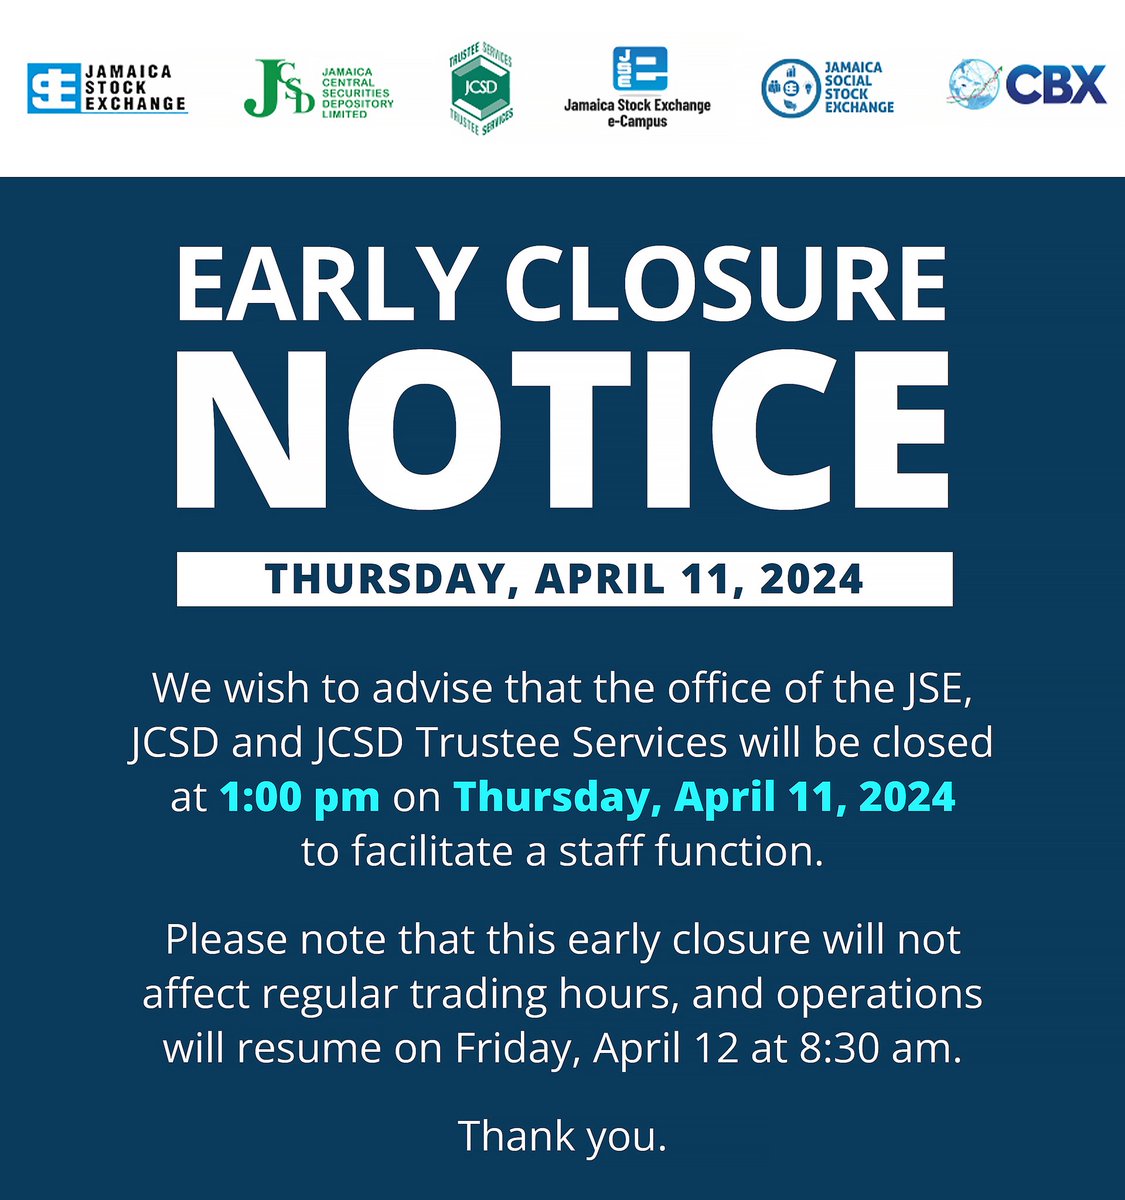 We wish to advise that the office of the JSE, JCSD and JCSD Trustee Services will be closed at 1:00 pm on Thursday, April 11, 2024, to facilitate a staff function. #JSENews